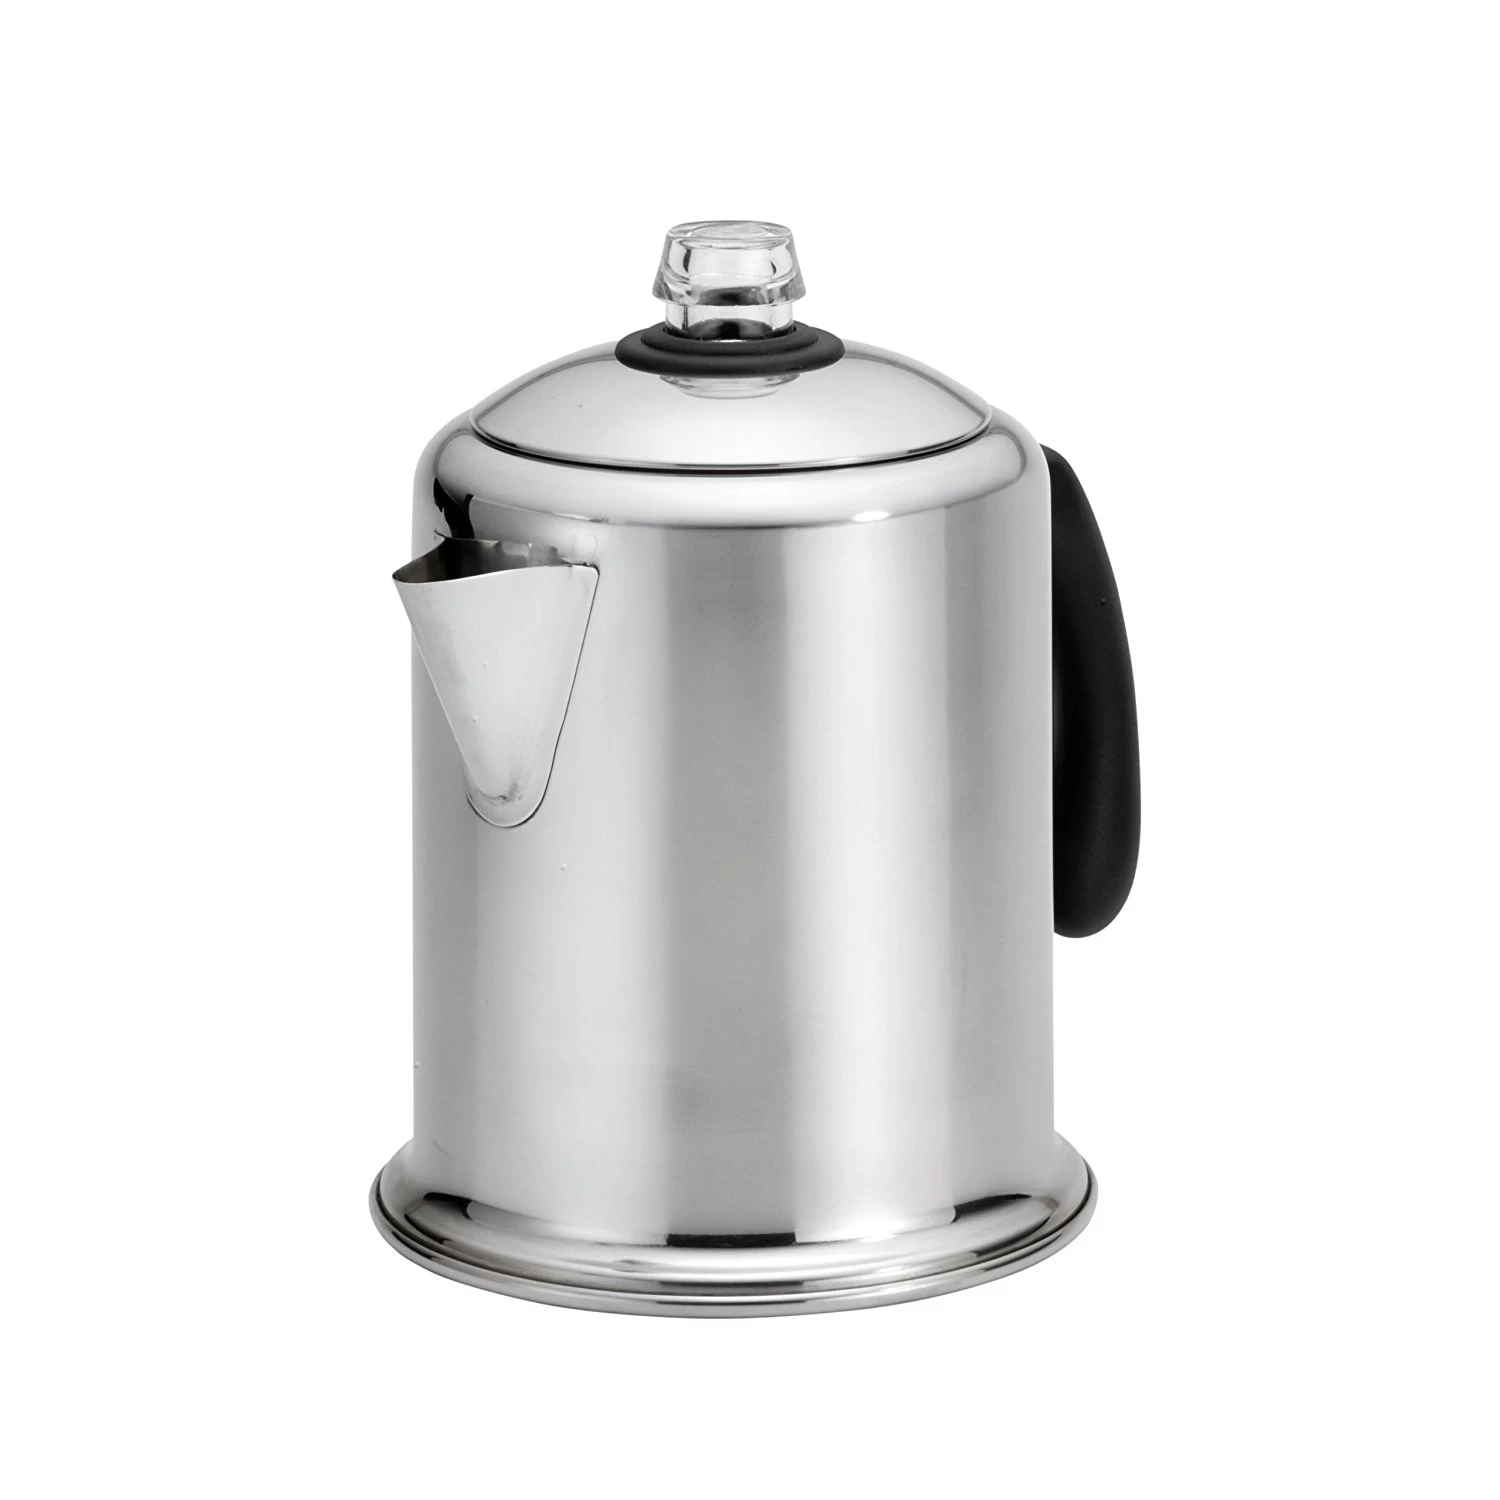 Stainless Steel  Coffee pot wholesales, China Stainless Steel Coffee Pot Factory, China Coffee pot company